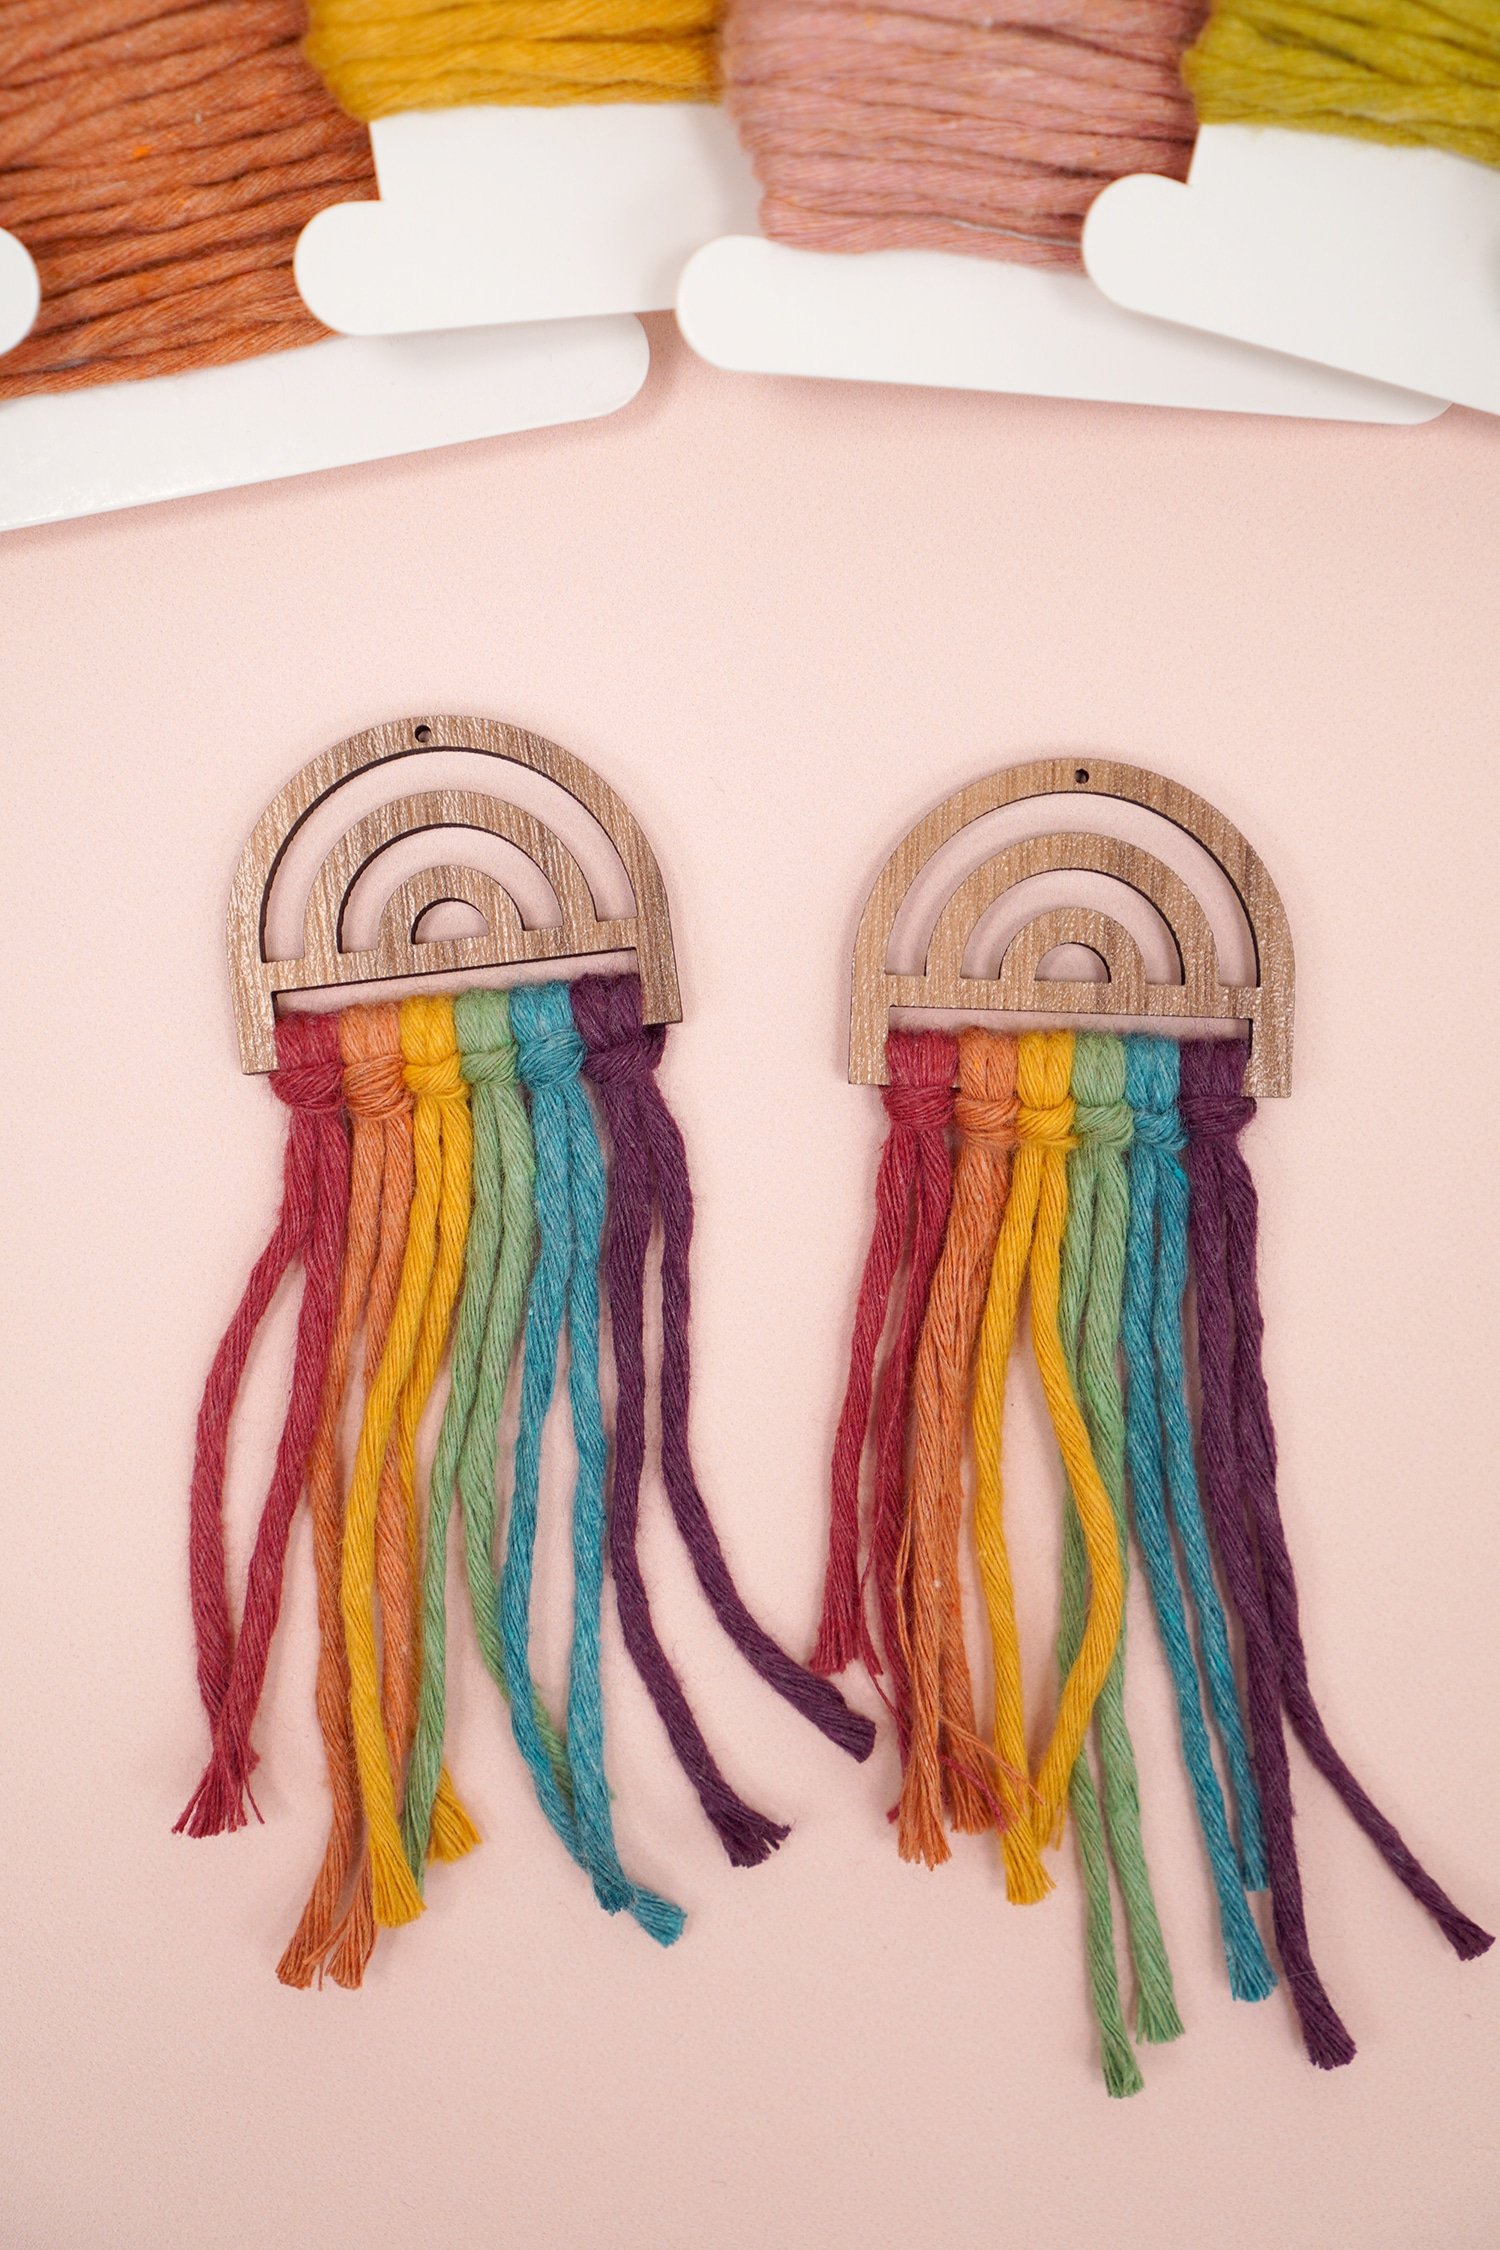 Untrimmed Rainbow Macrame Earrings on peach background with macrame cord